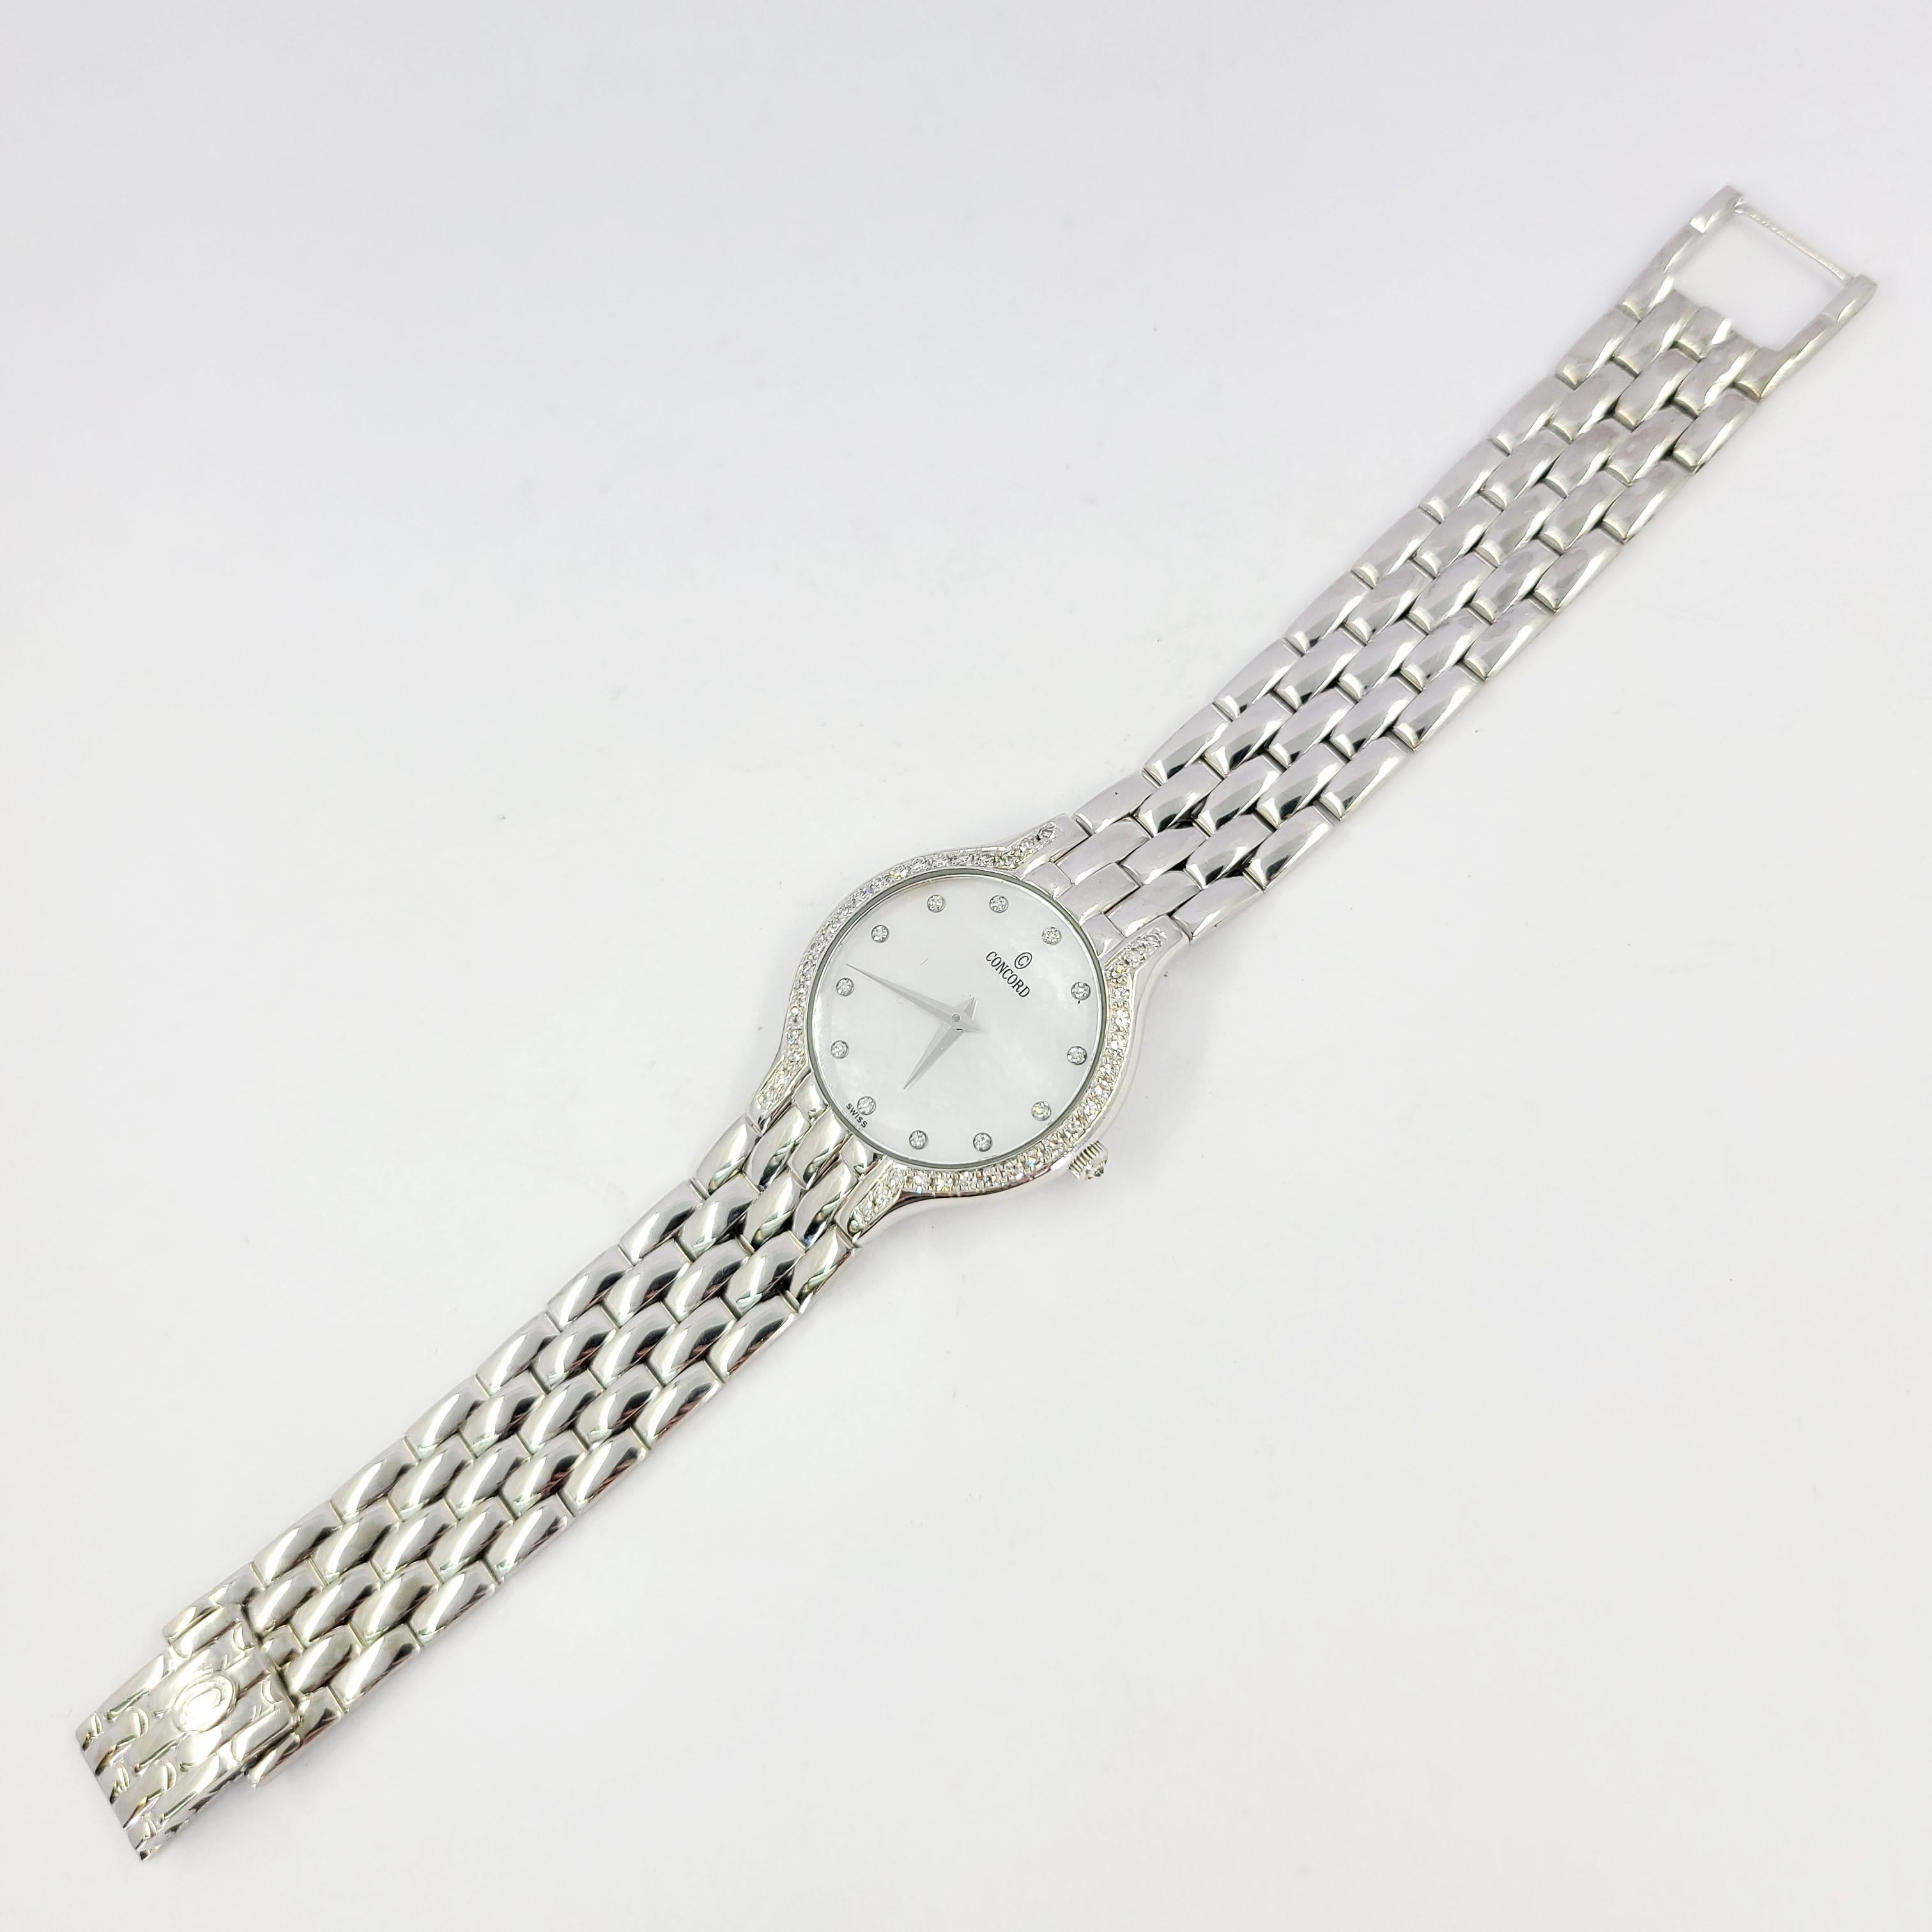 Pre-Owned 14 Karat White Gold Concord Les Palais Quartz Watch With Diamond Bezel & Mother Of Pearl Dial With Diamond Markers. 6.25 Inches Long. Finished Weight Is 52 Grams. Battery Replaced Upon Purchase, With 1 Year Timekeeping Warranty.